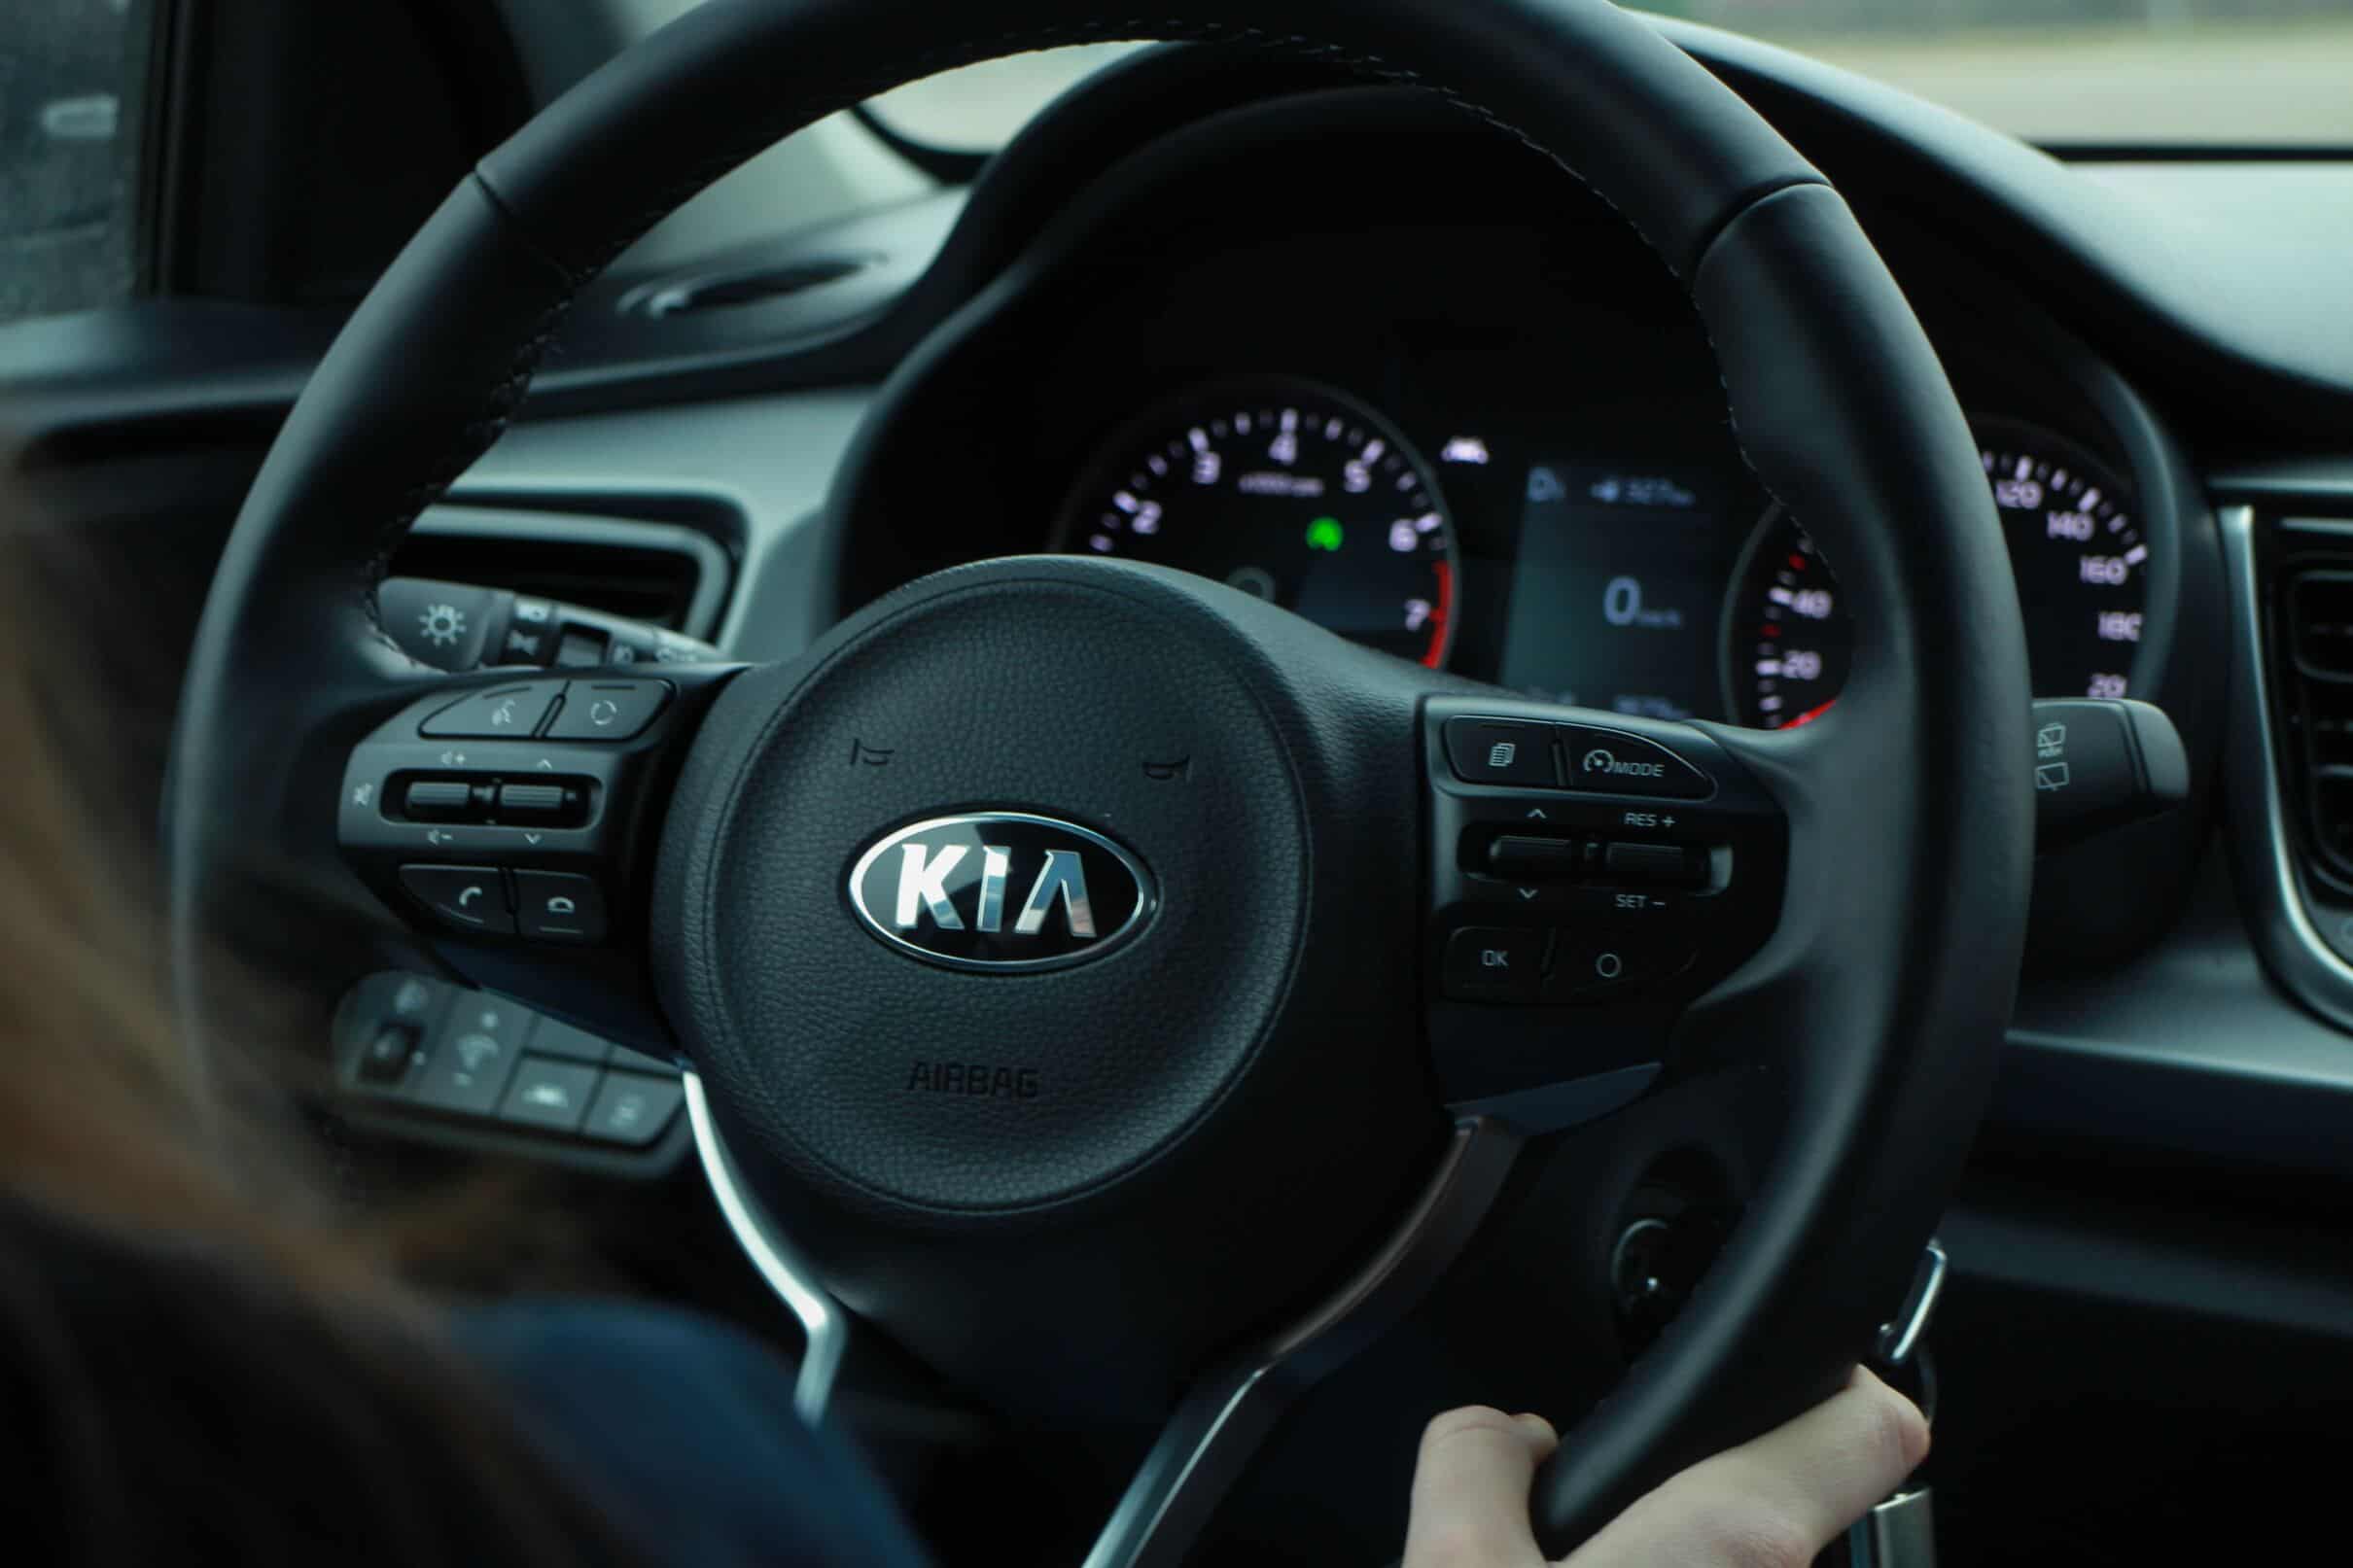 Kia Sportage Interior - A Luxurious and Well-Appointed Cabin. 